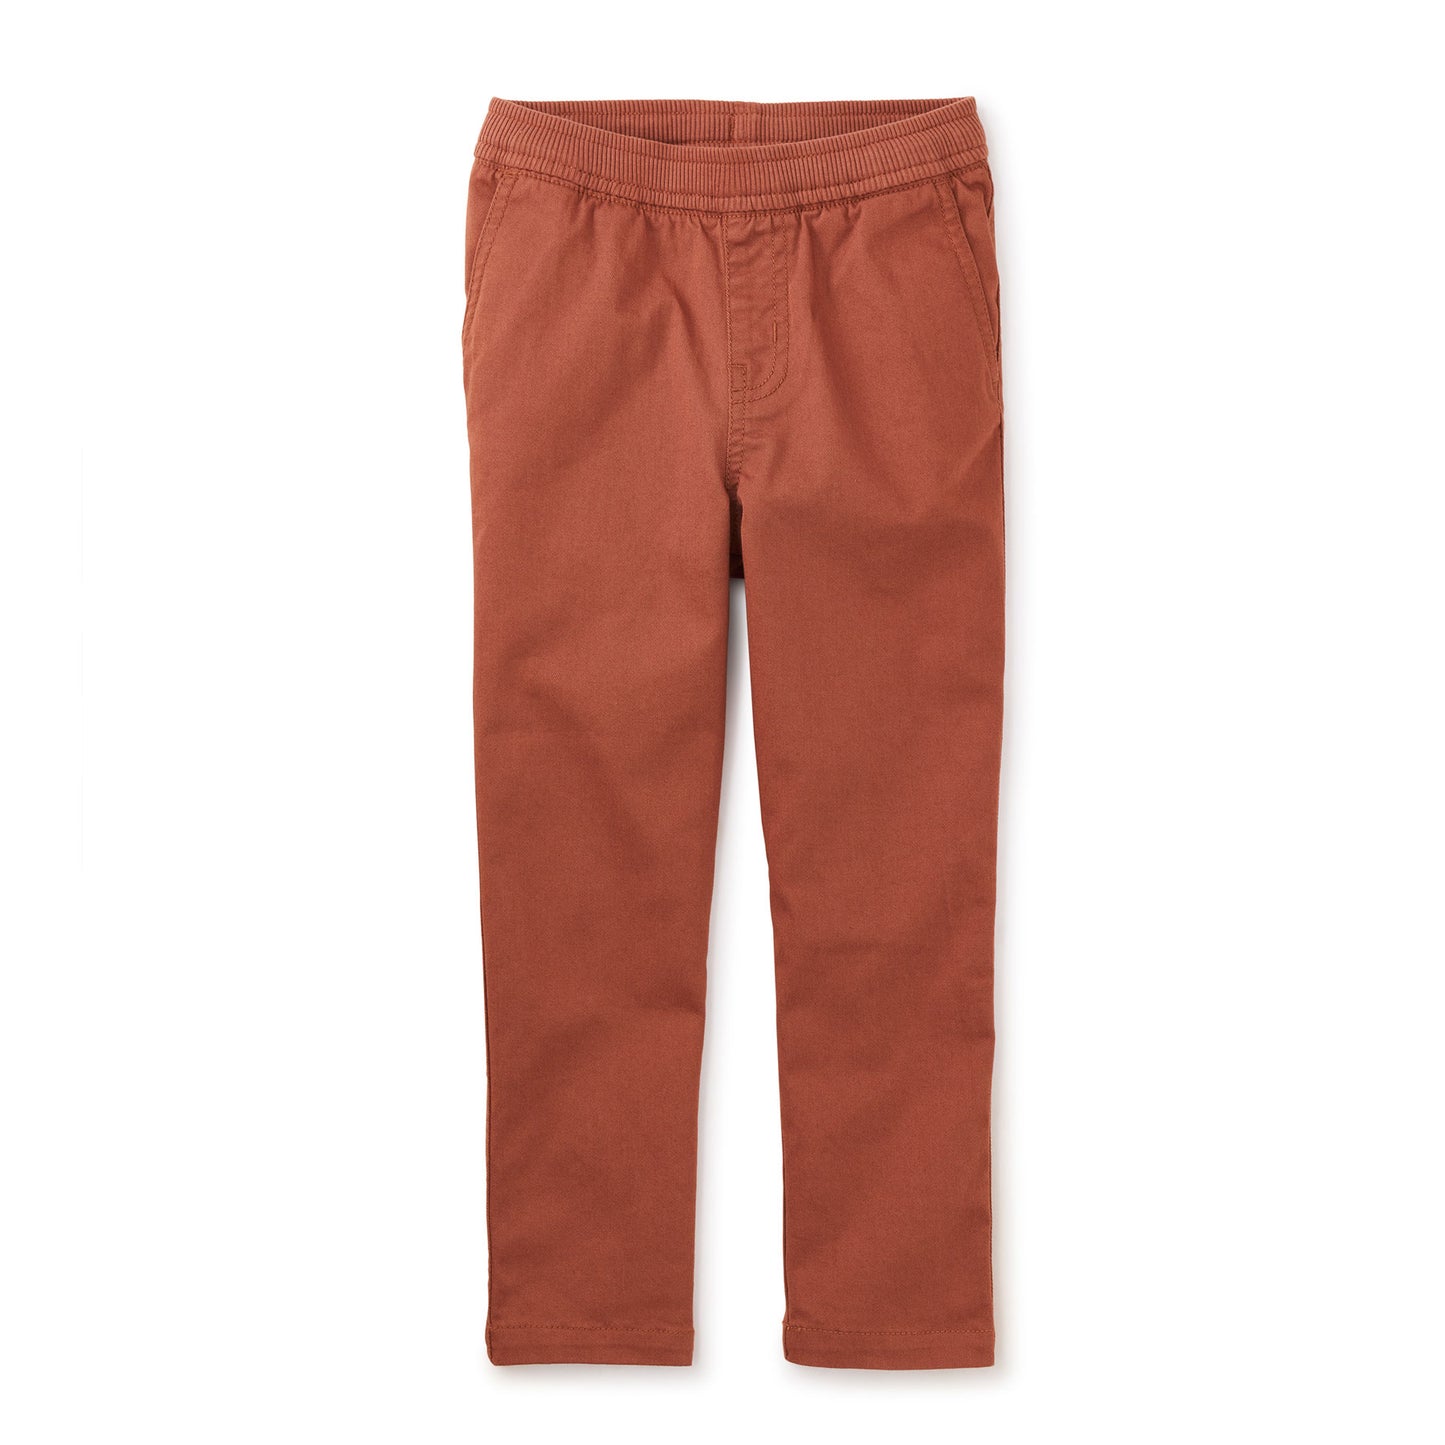 Tea Collection Timeless Stretch Twill Pants - Russet